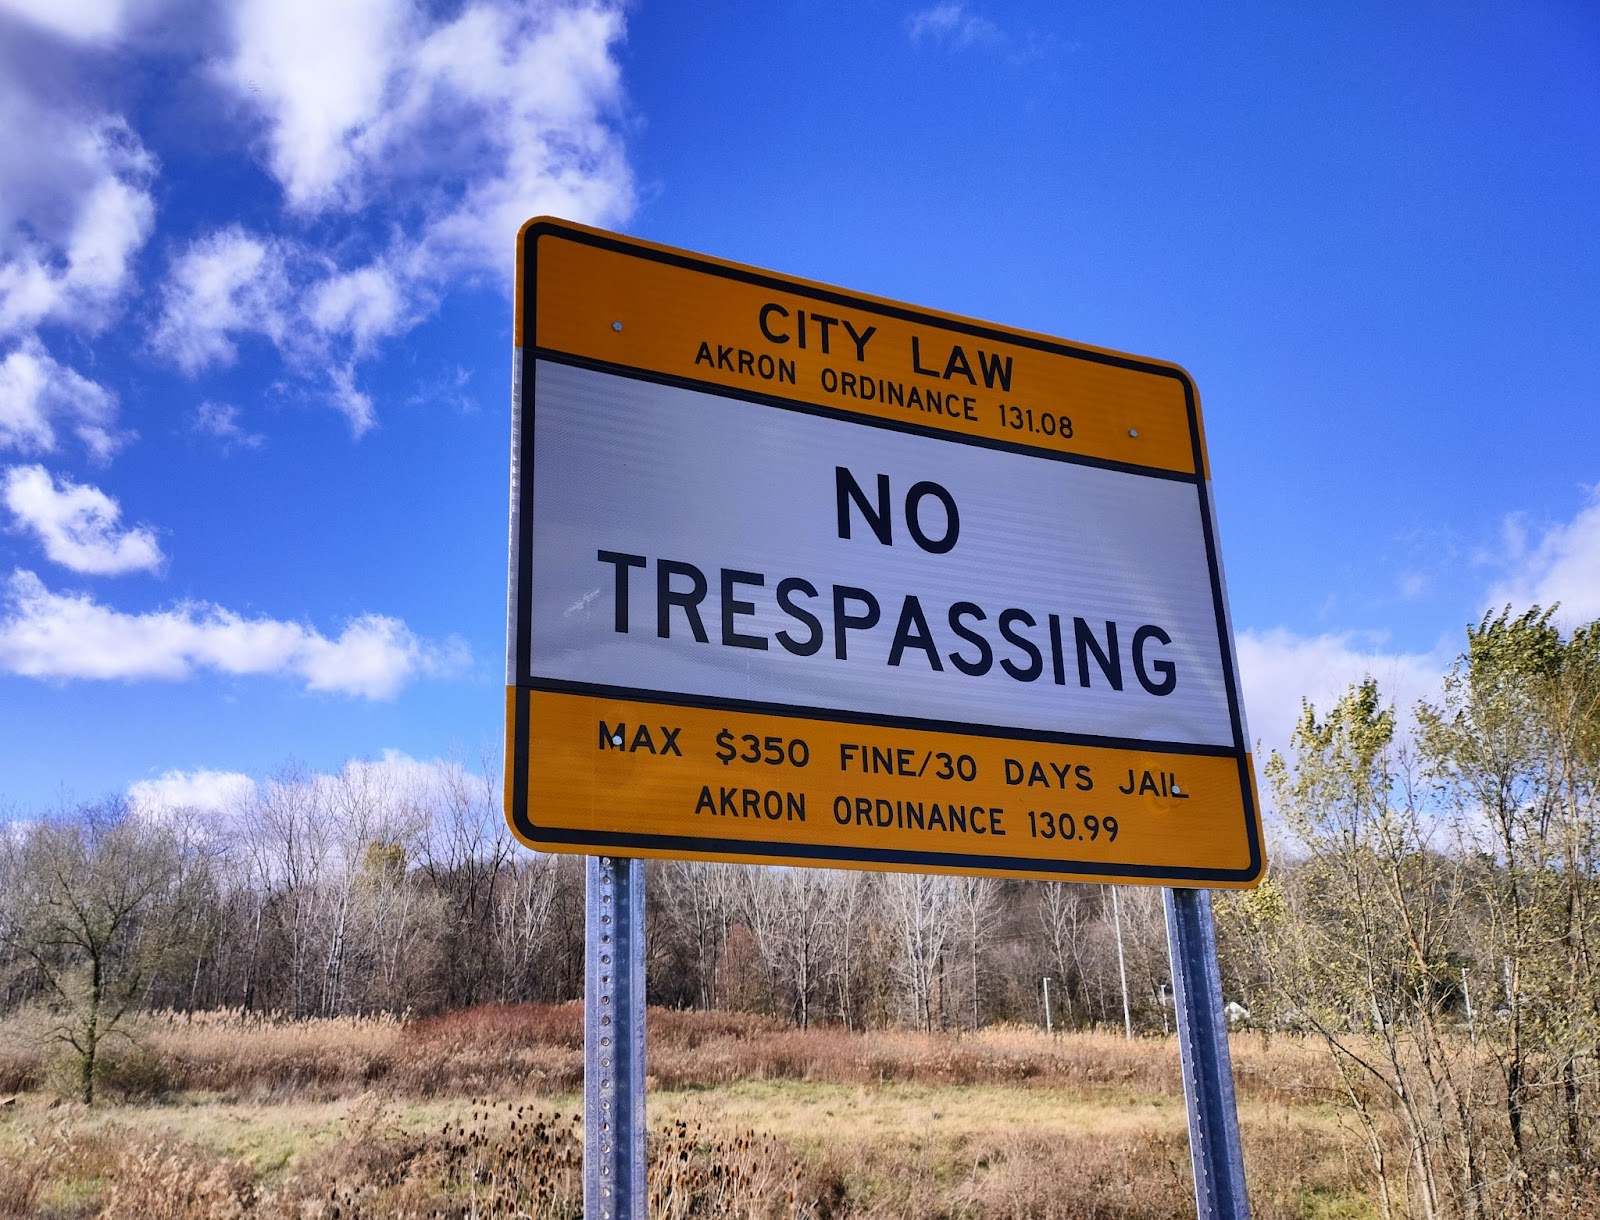 A sign posted outside of White Pond wetlands that reads, City Law, Akron Ordinance 131.08, NO TRESPASSING, Max $350 fine/30 Days Jail, Akron Ordinance 130.99